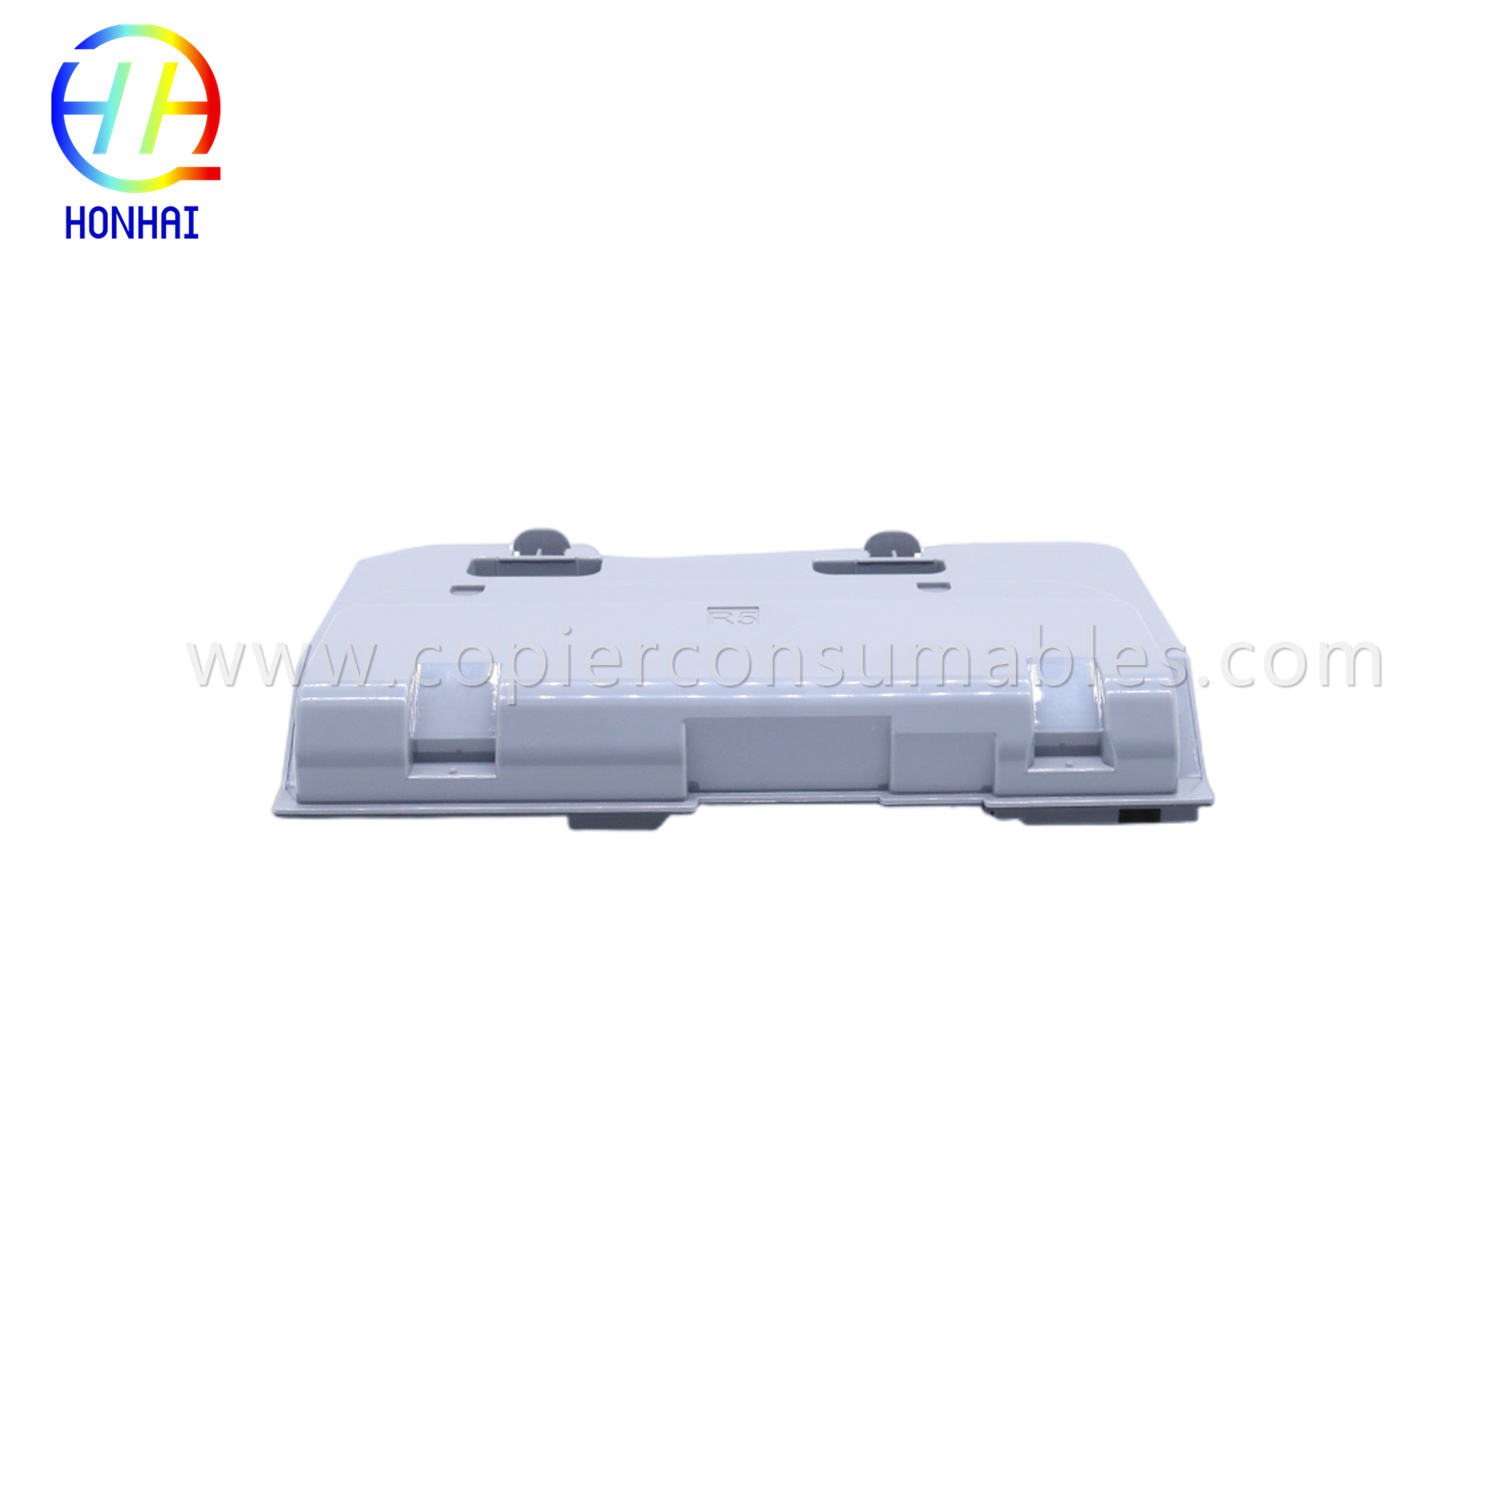 Waste Toner Container for Docucentre IV C2260 C2263 C2265 (CWAA0777)   (1)